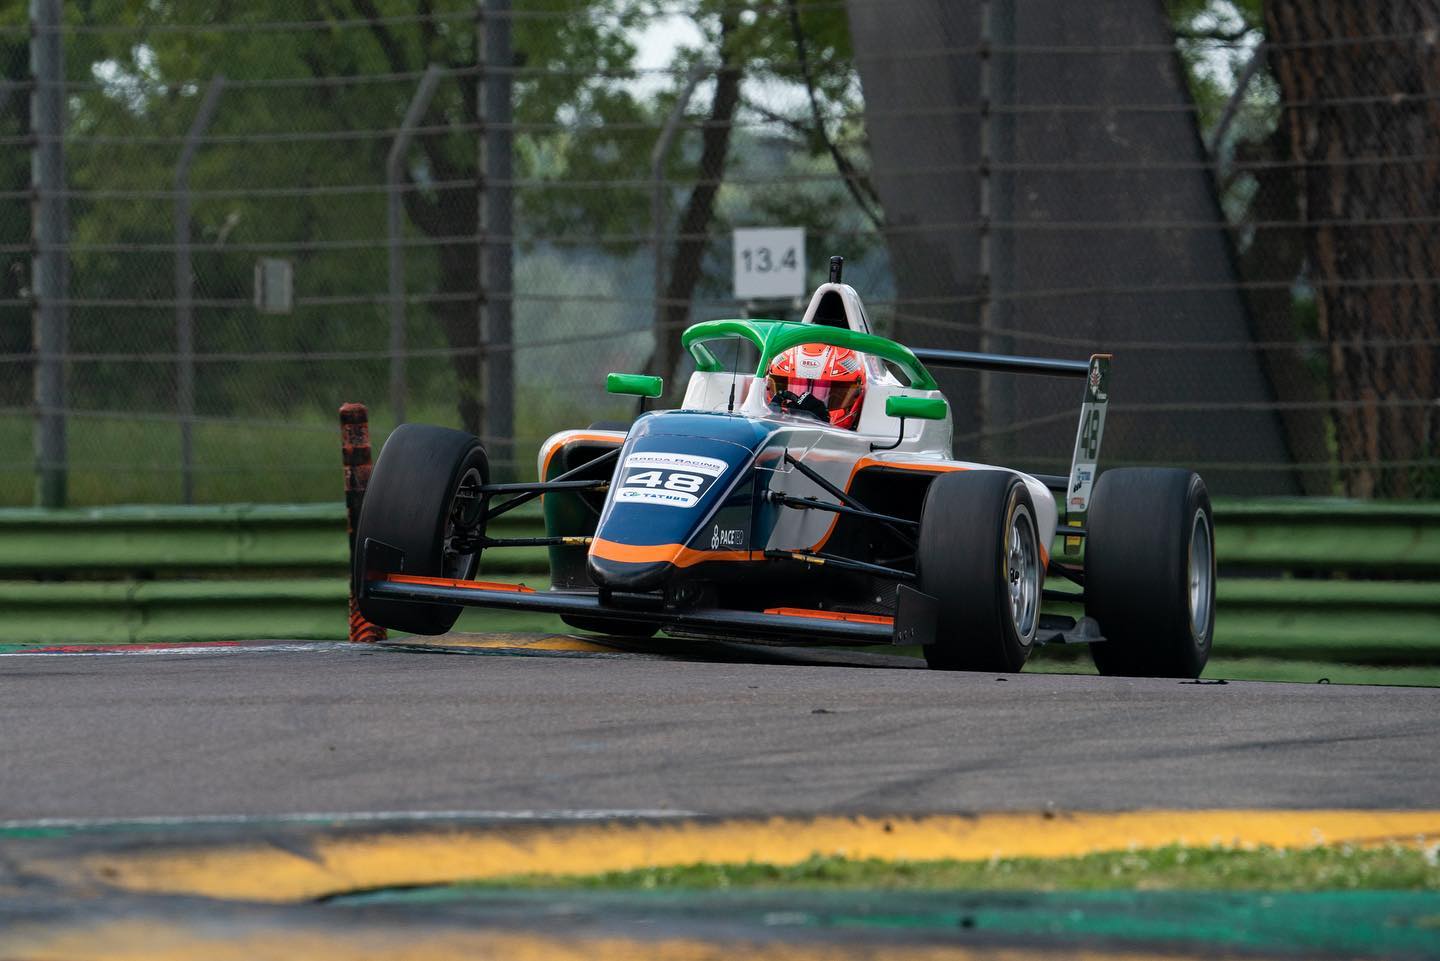 PHM Racing team is joining ACCR Czech Formula